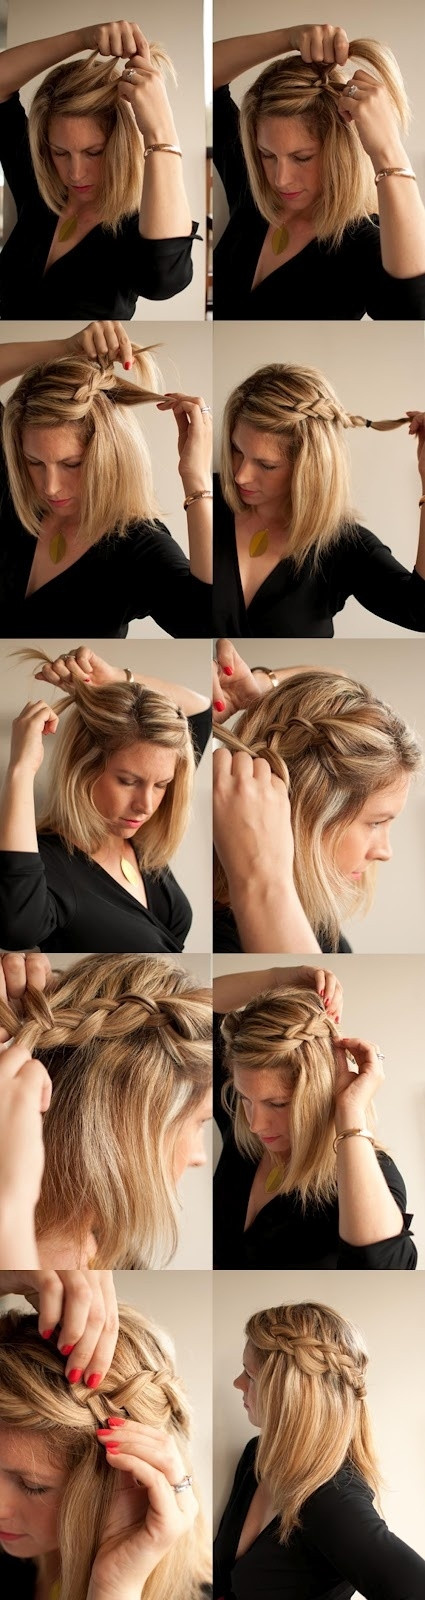 DIY Braid Hair
 11 Interesting And Useful Hair Tutorials For Every Day